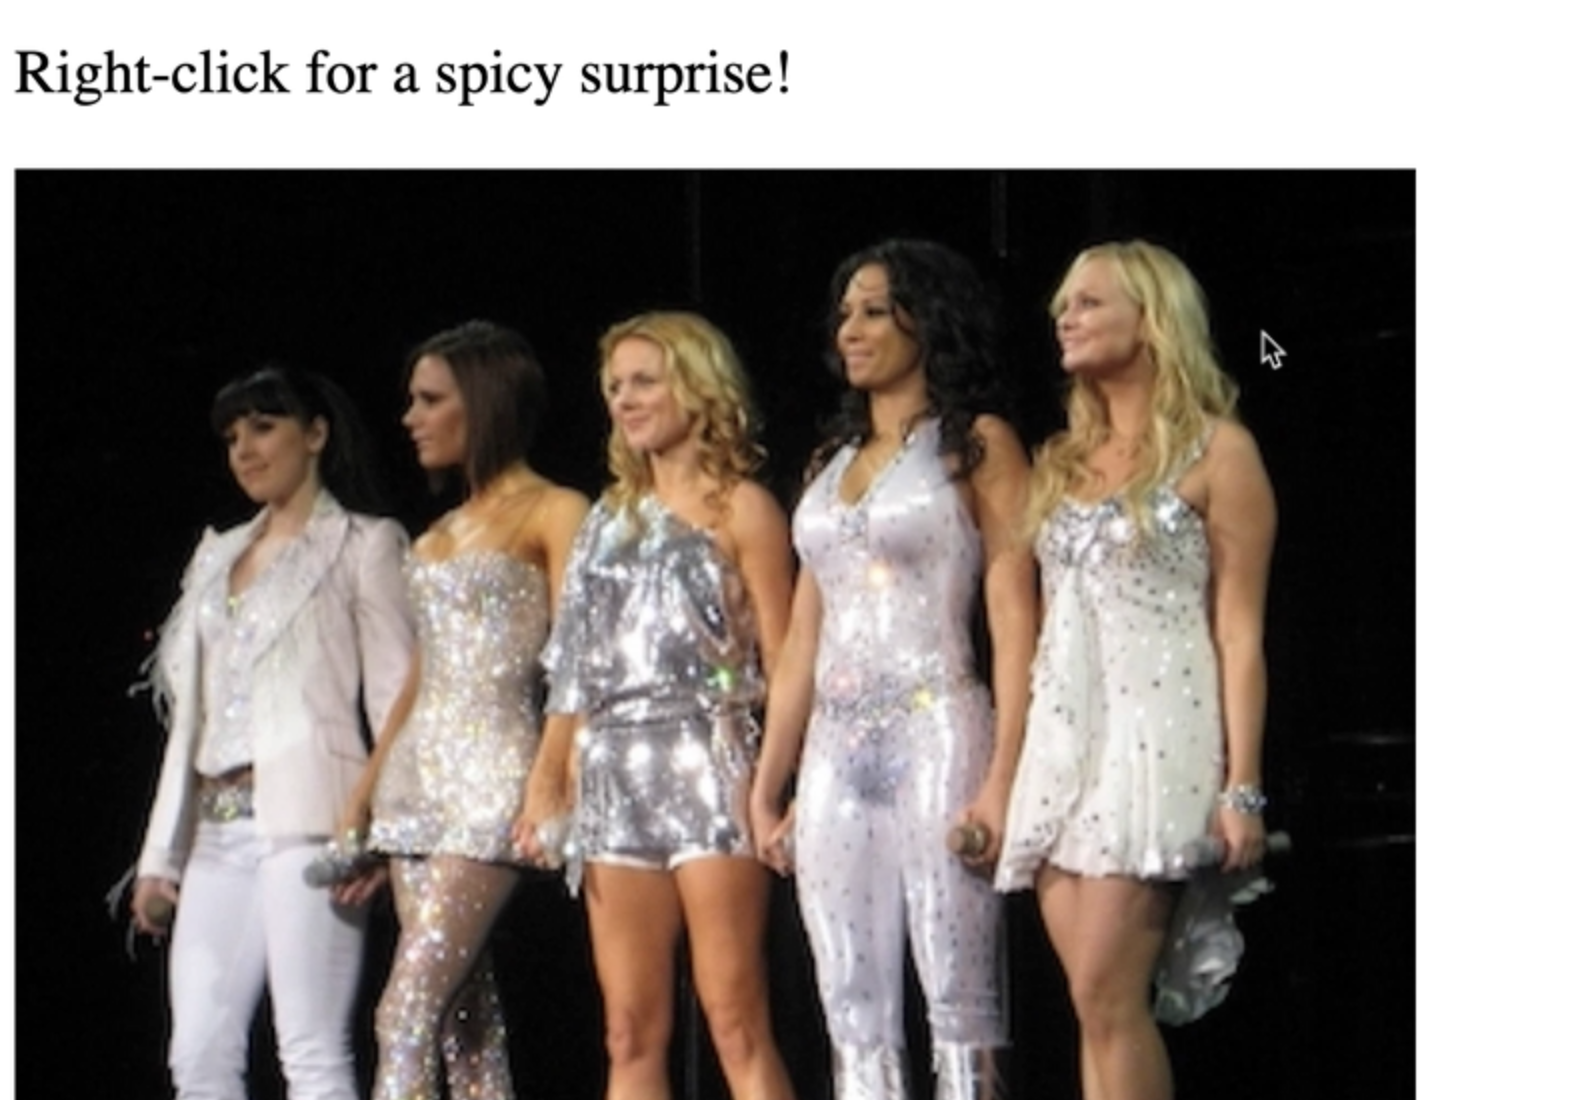 The Spice Girls without the context menu blocking them